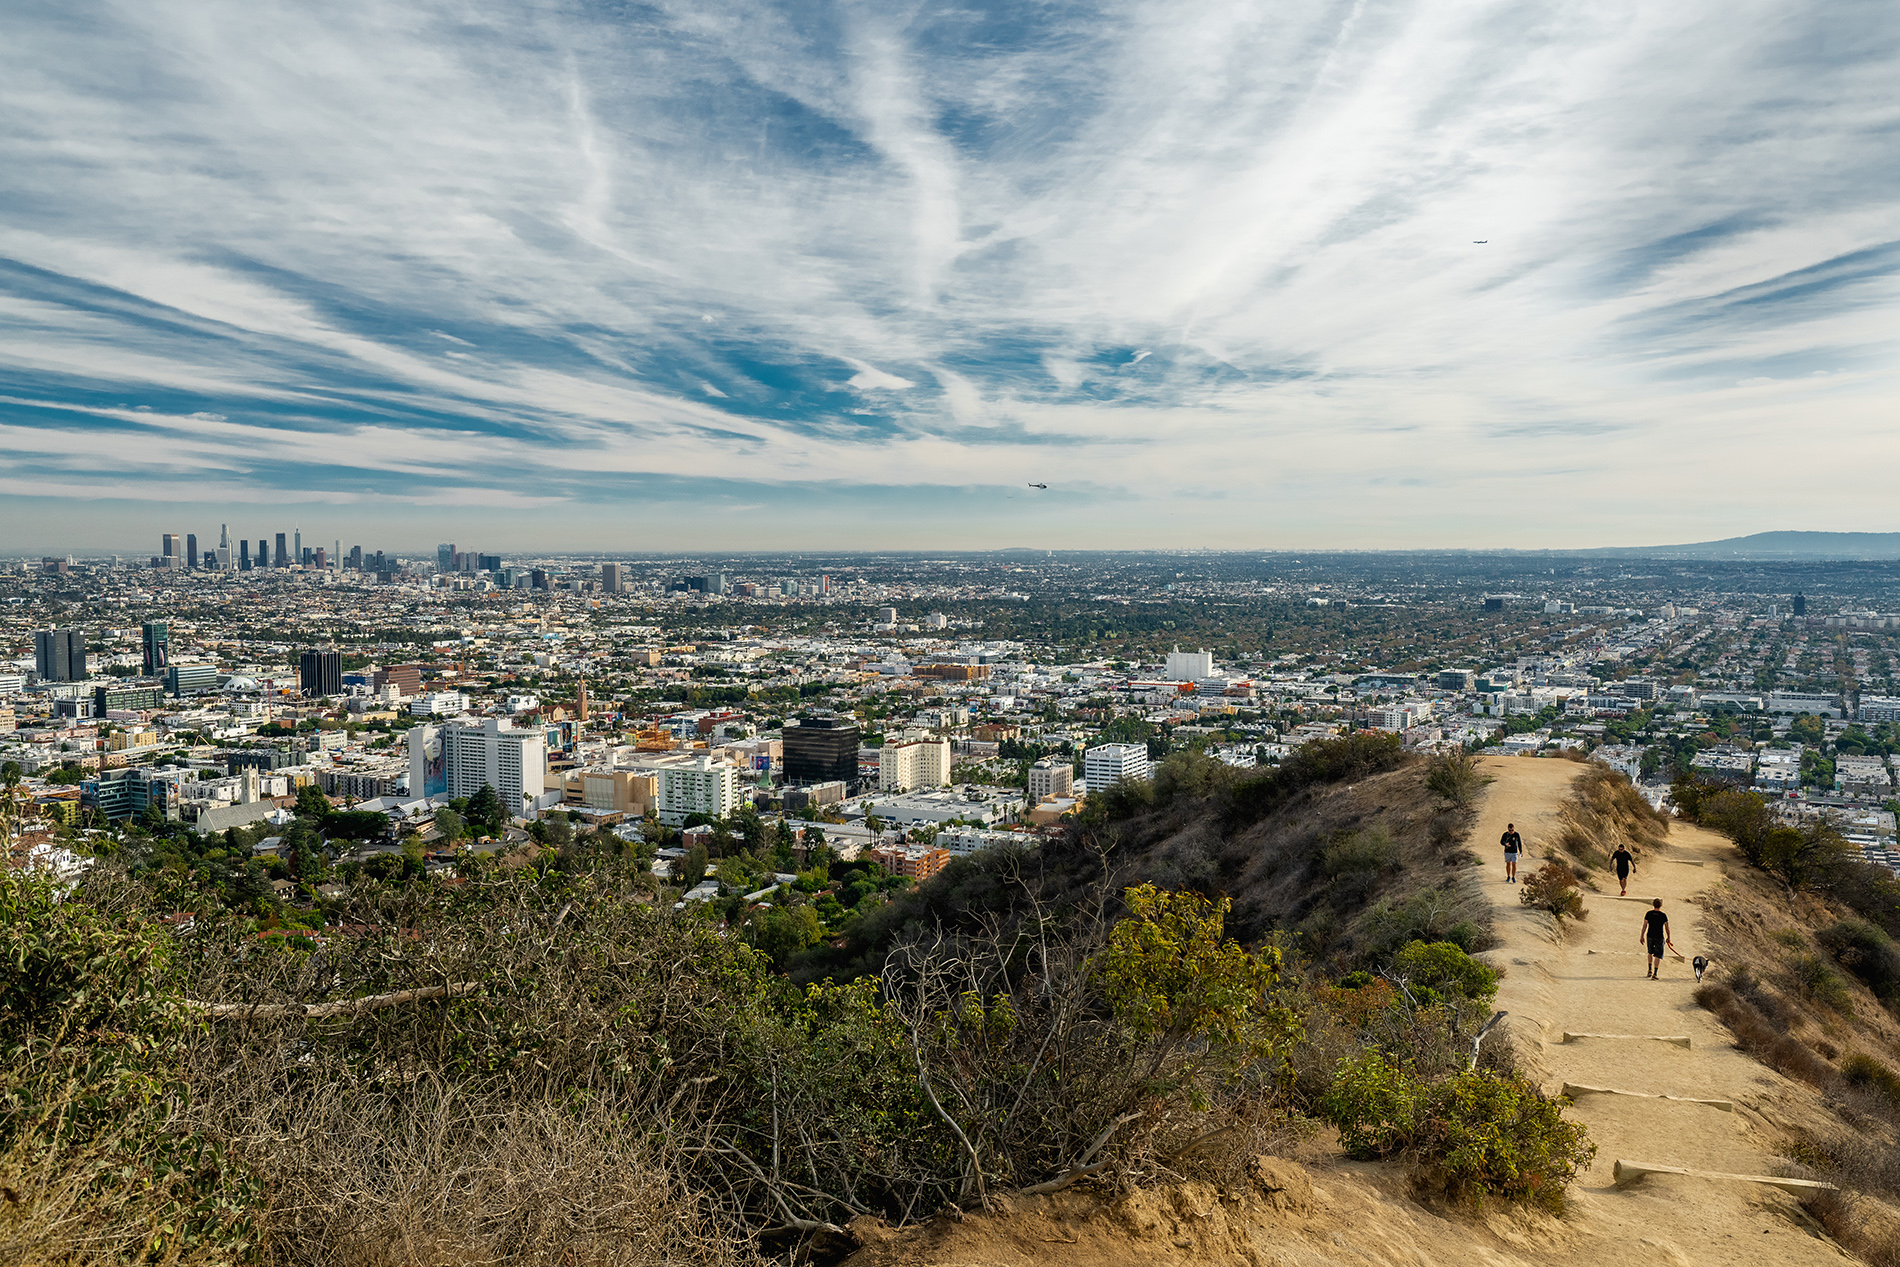 Runyon Canyon offers lots of room with a view.